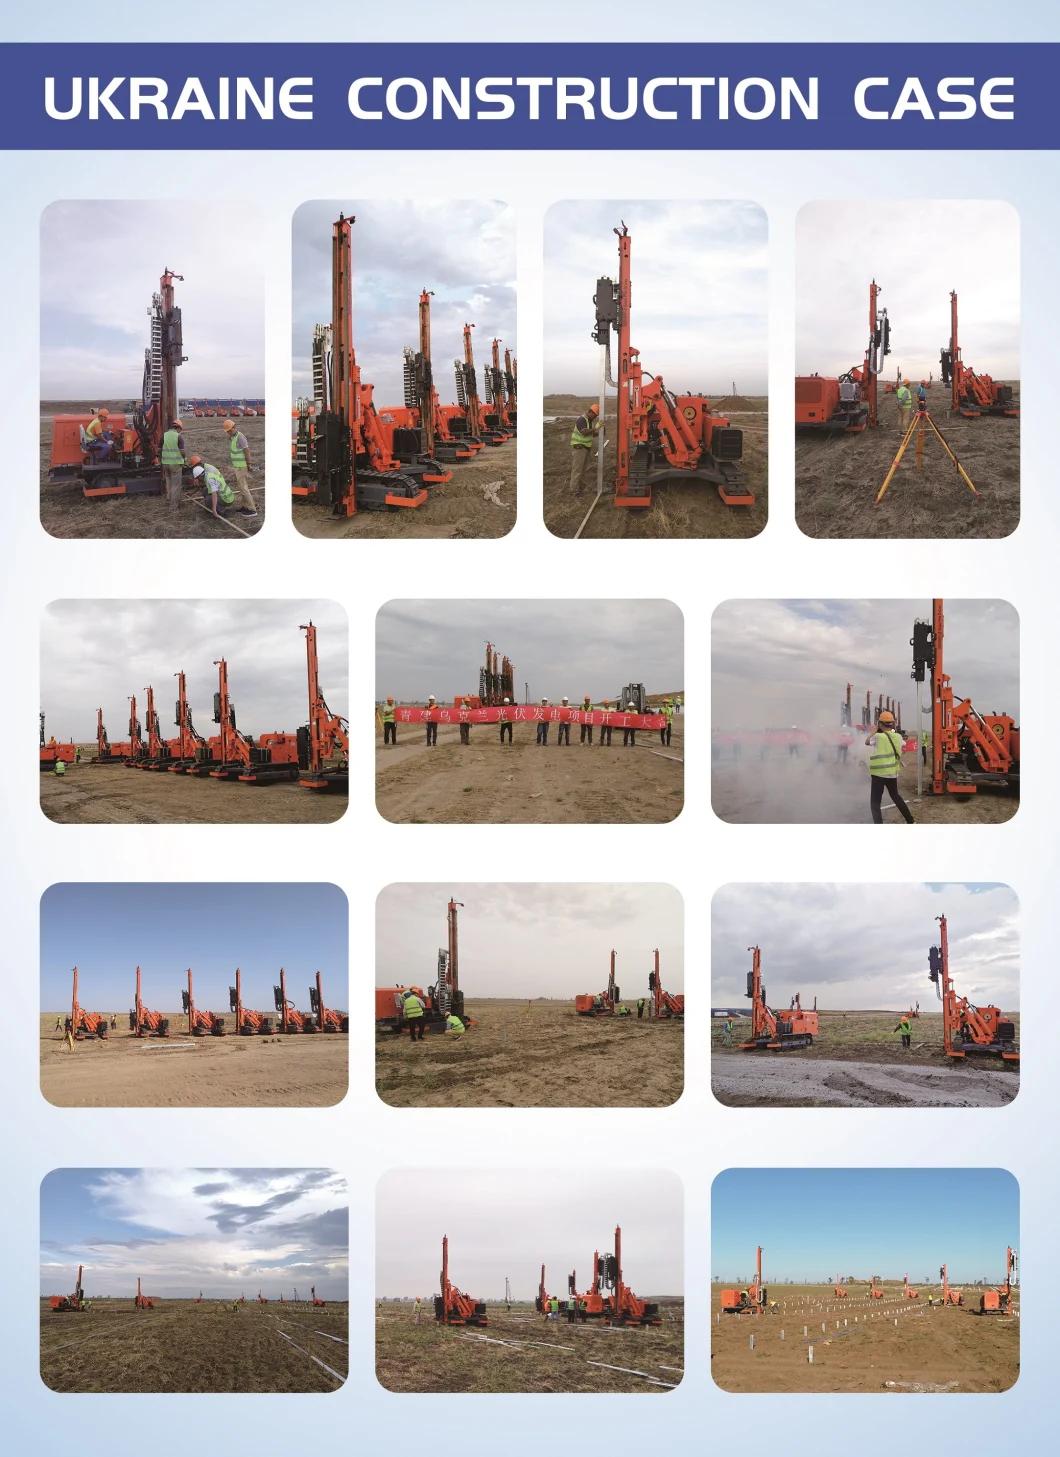 High Quality Low Price Crawler Mounted Solar Pile Driver Machine